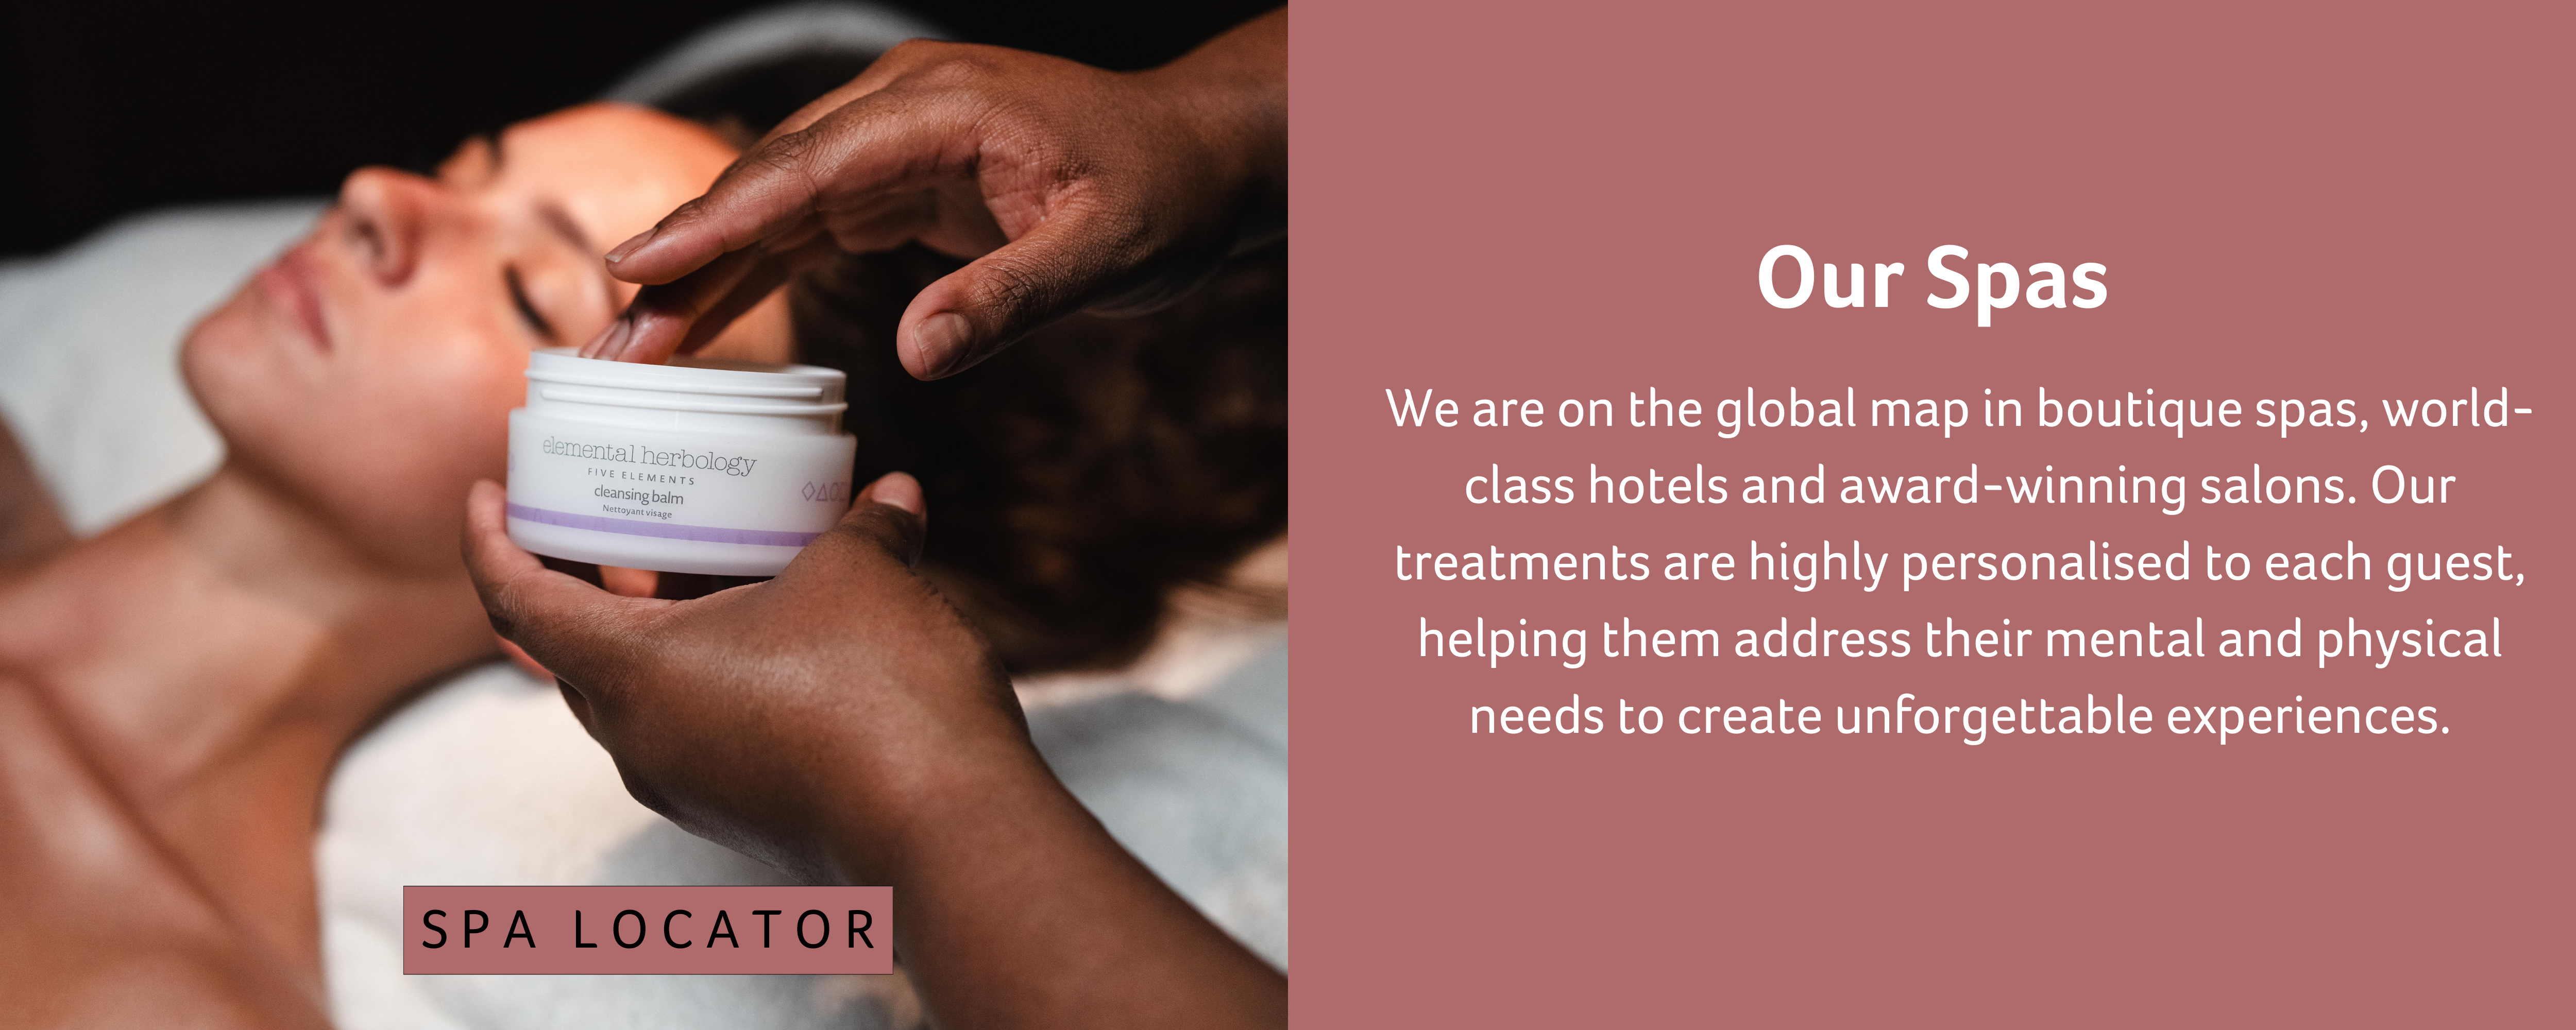 About us: Our Spas